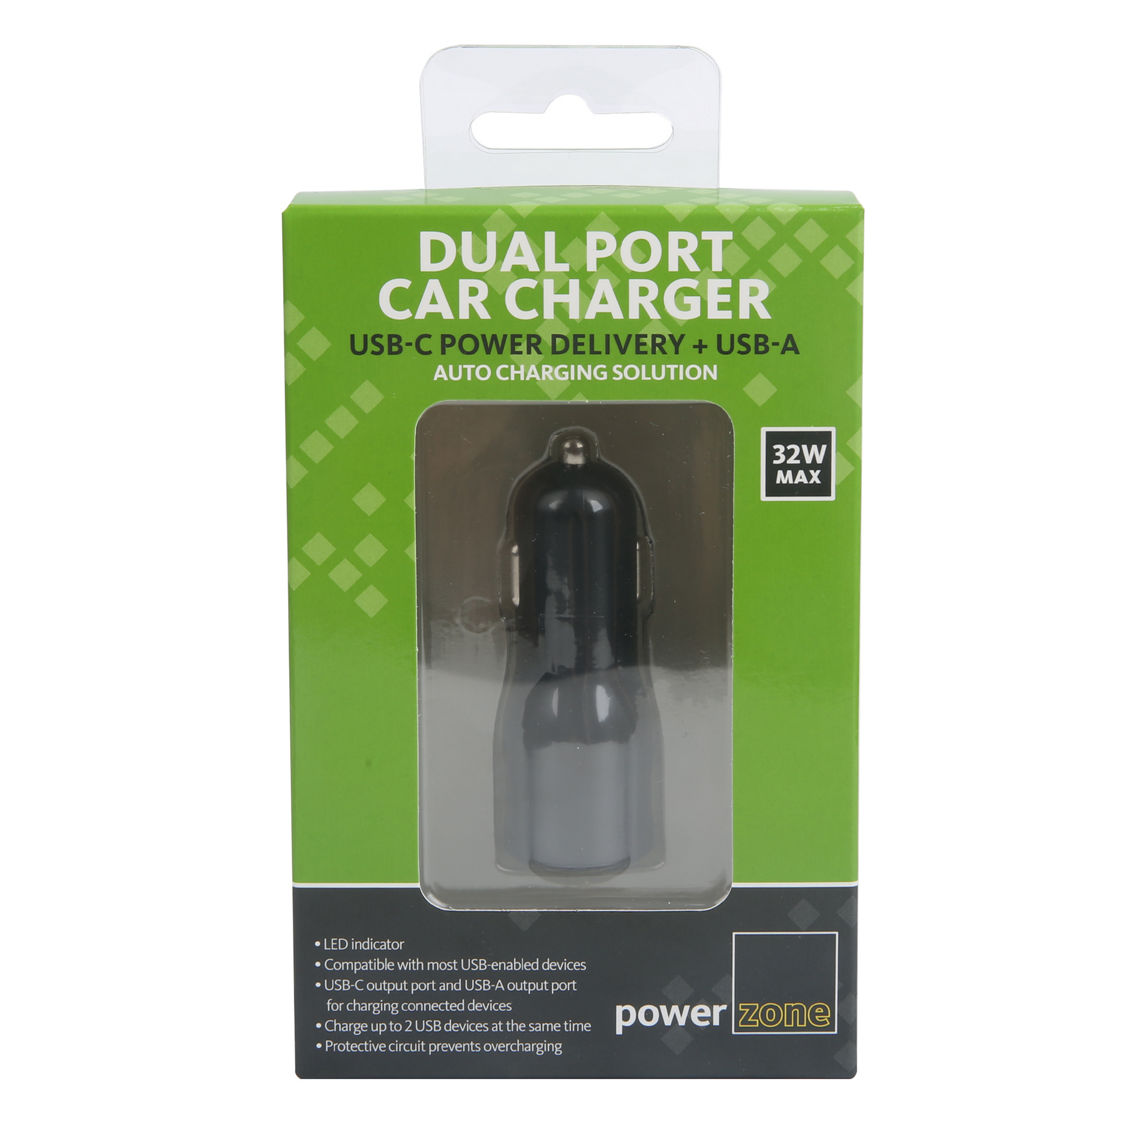 Powerzone Car Charger with USB-C and USB-A Dual Charging Ports - Image 3 of 5